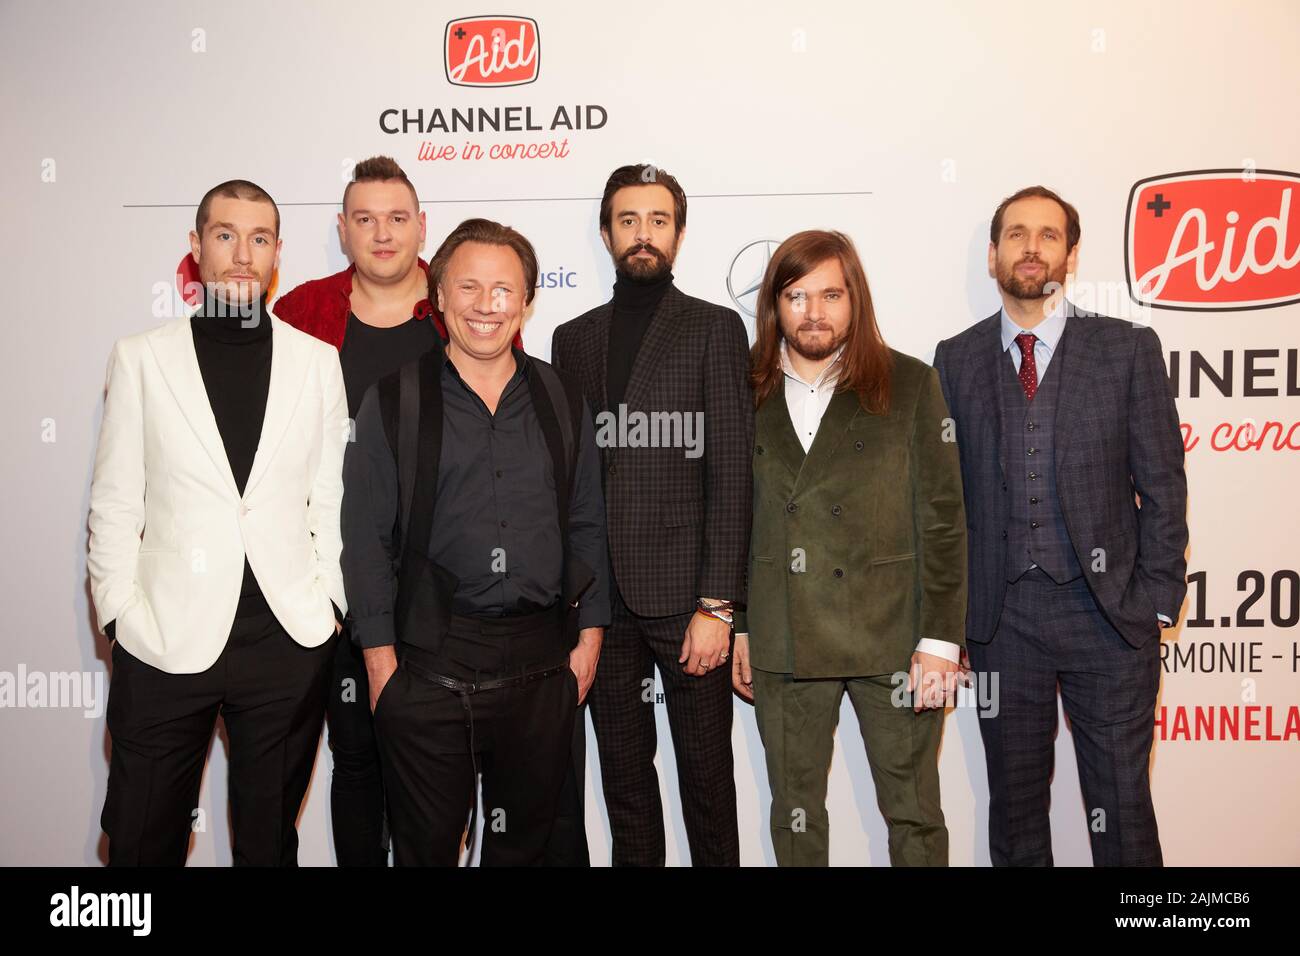 Hamburg, Germany. 04th Jan, 2020. The British indie rock band Bastille, Dan Smith (l), singer, Kyle Simmons (3rd from right), keytarist, Chris Wood (2nd from right), drummer, Will Farquarson (r), guitarist, and Fabian Narkus (2nd from left).l.), Managing Director FABS FOUNDATION - Channel Aid, and Kristjan Järvi (3rd from left), conductor, come to the Benifiz concert 'Channel Aid' of the video platform Youtube in the Elbphilharmonie. Credit: Georg Wendt/dpa/Alamy Live News Stock Photo